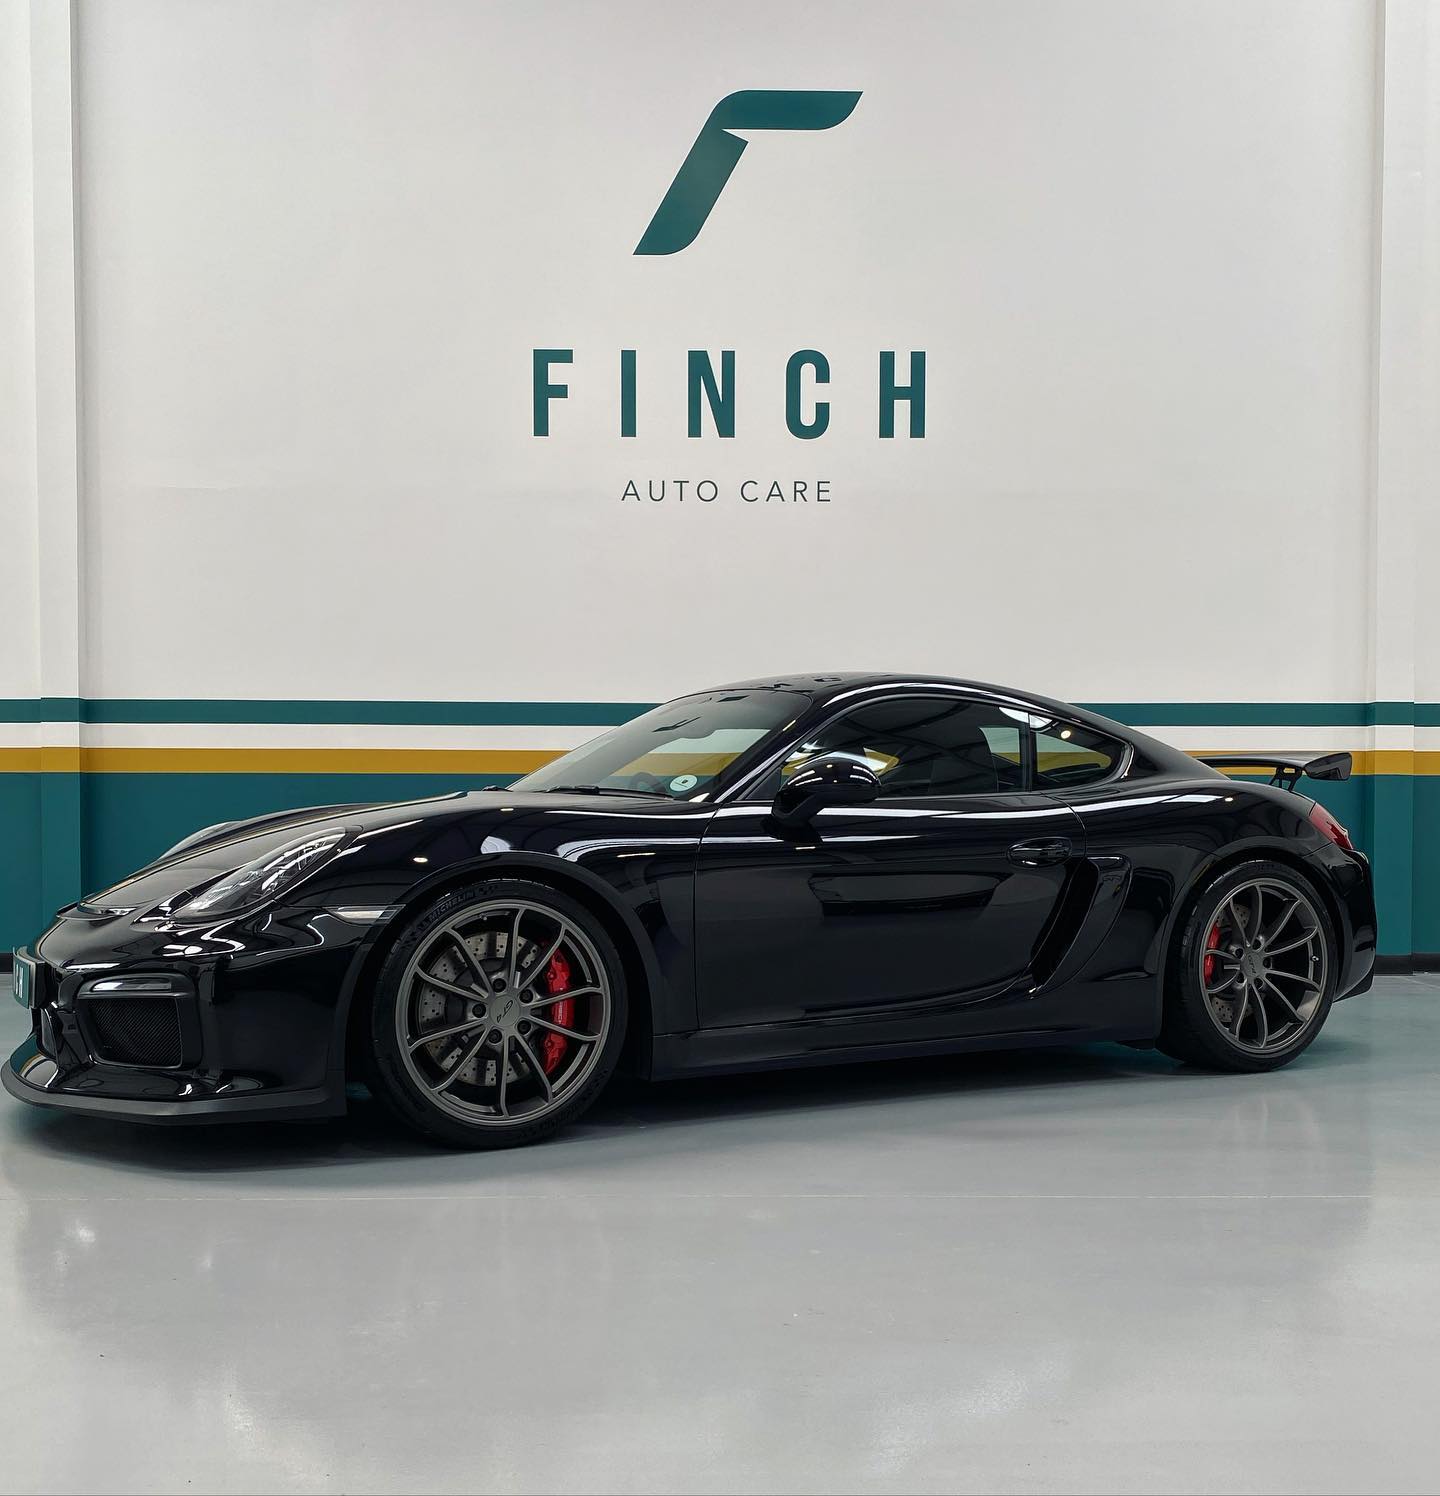 A black sports car parked inside a facility with "finch auto care" sign on the wall.